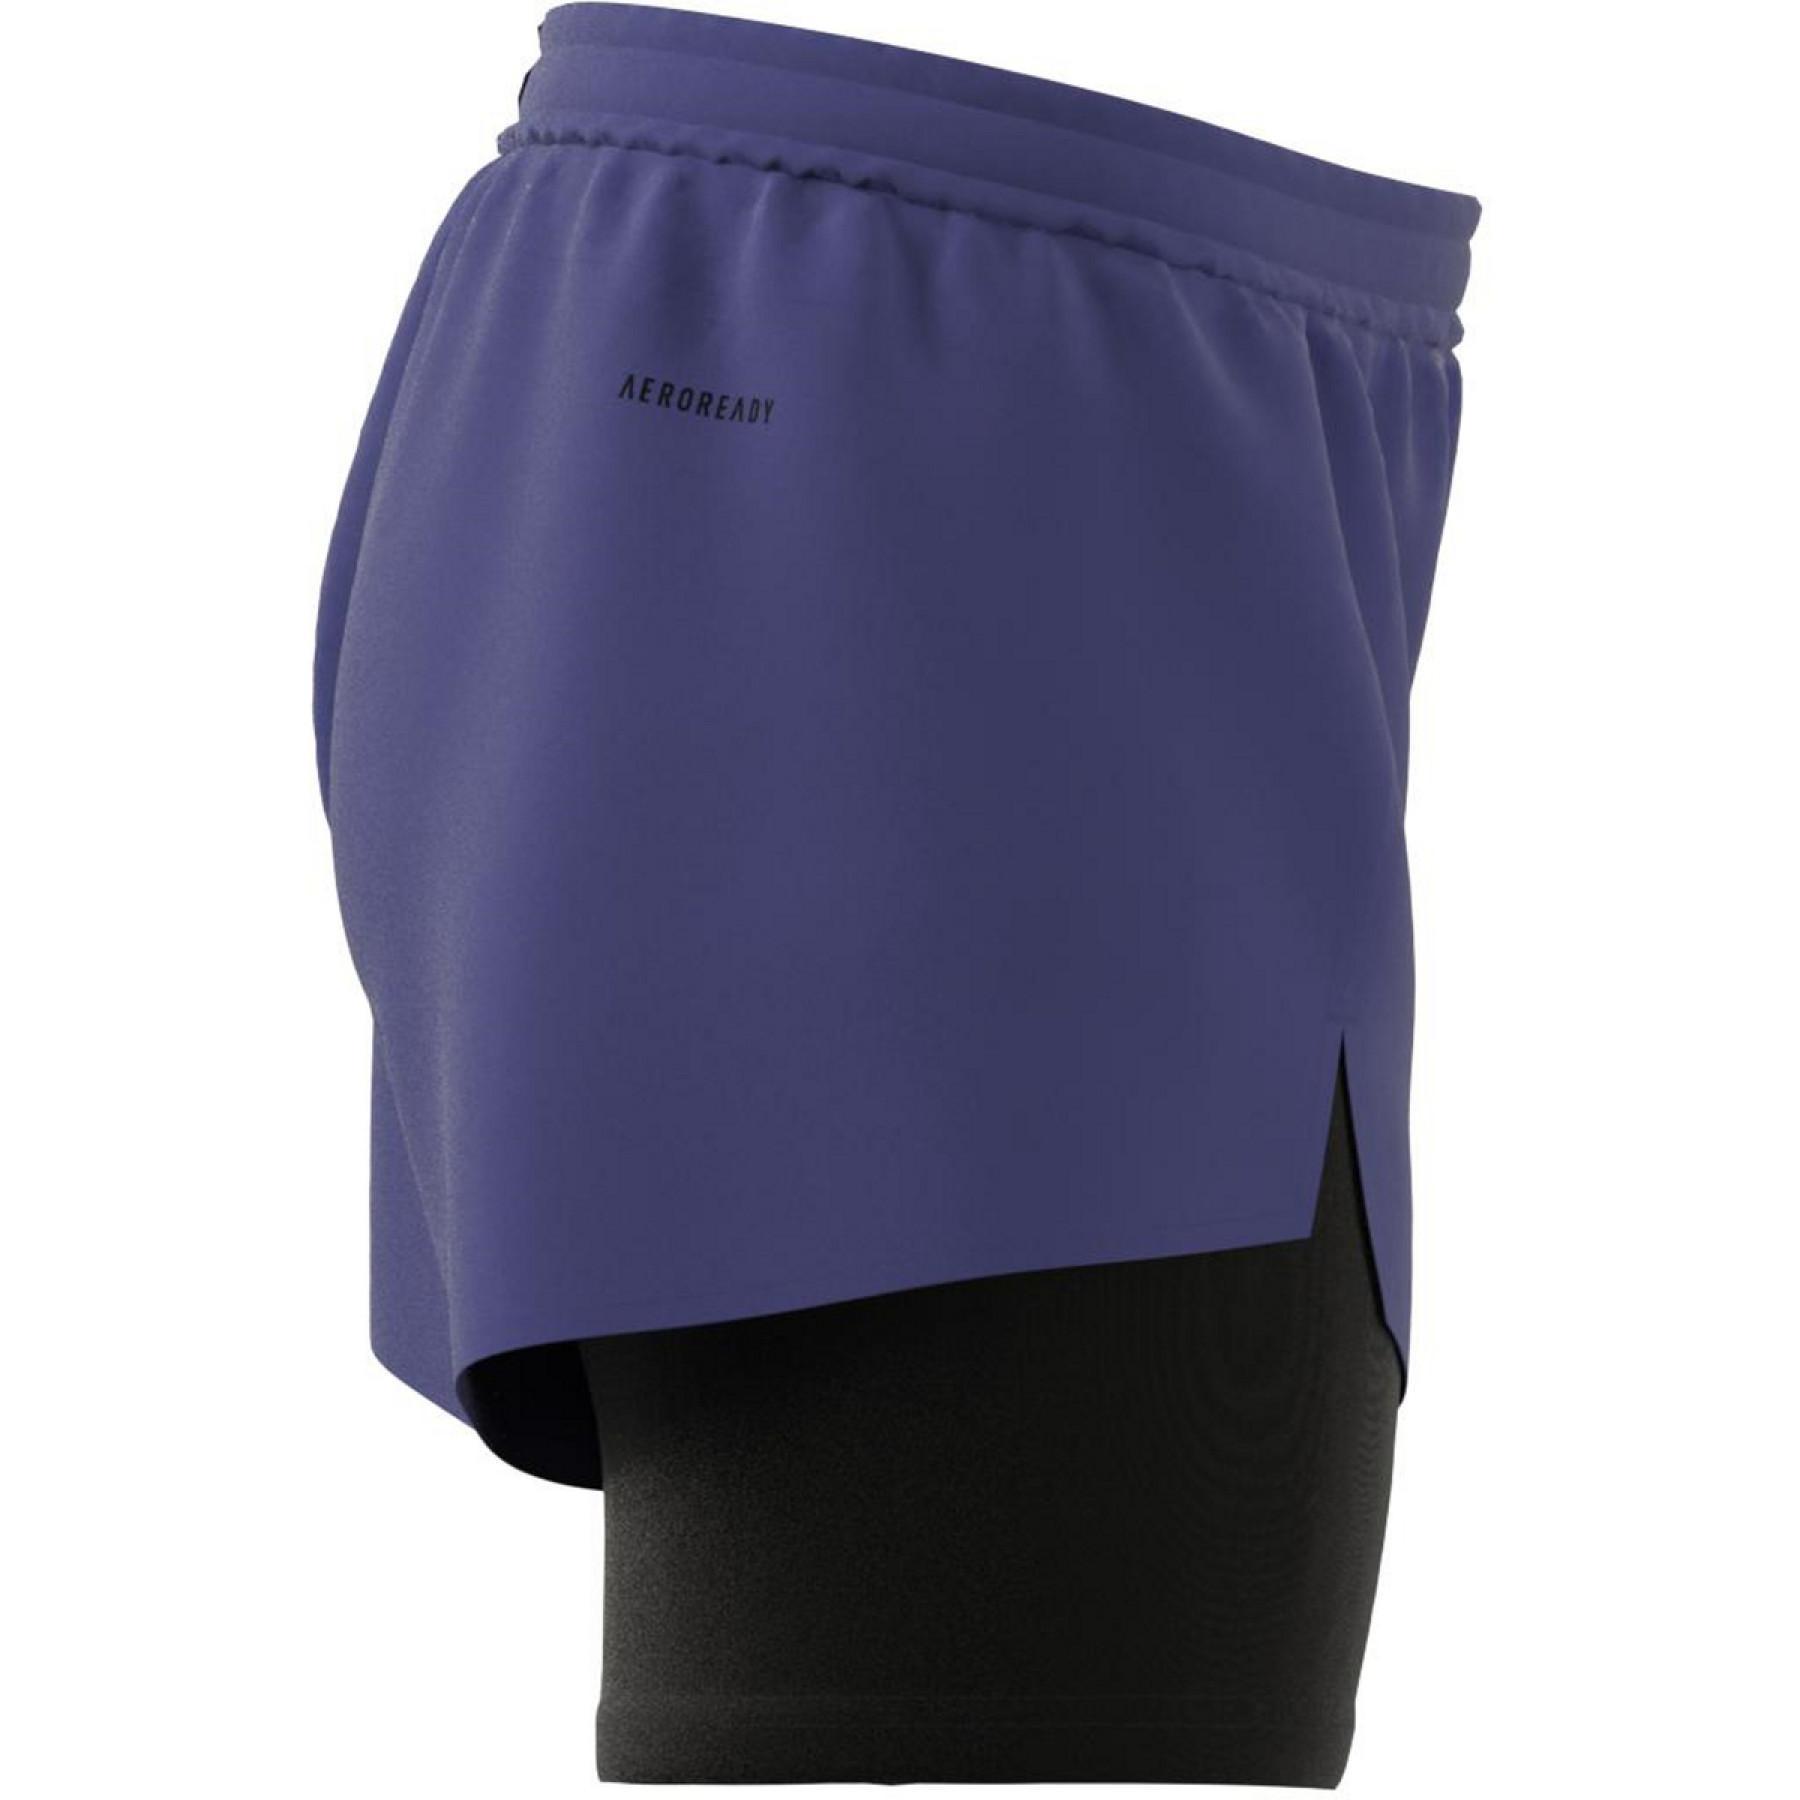 Women's shorts adidas Primeblue Designed To Move 2-in-1port